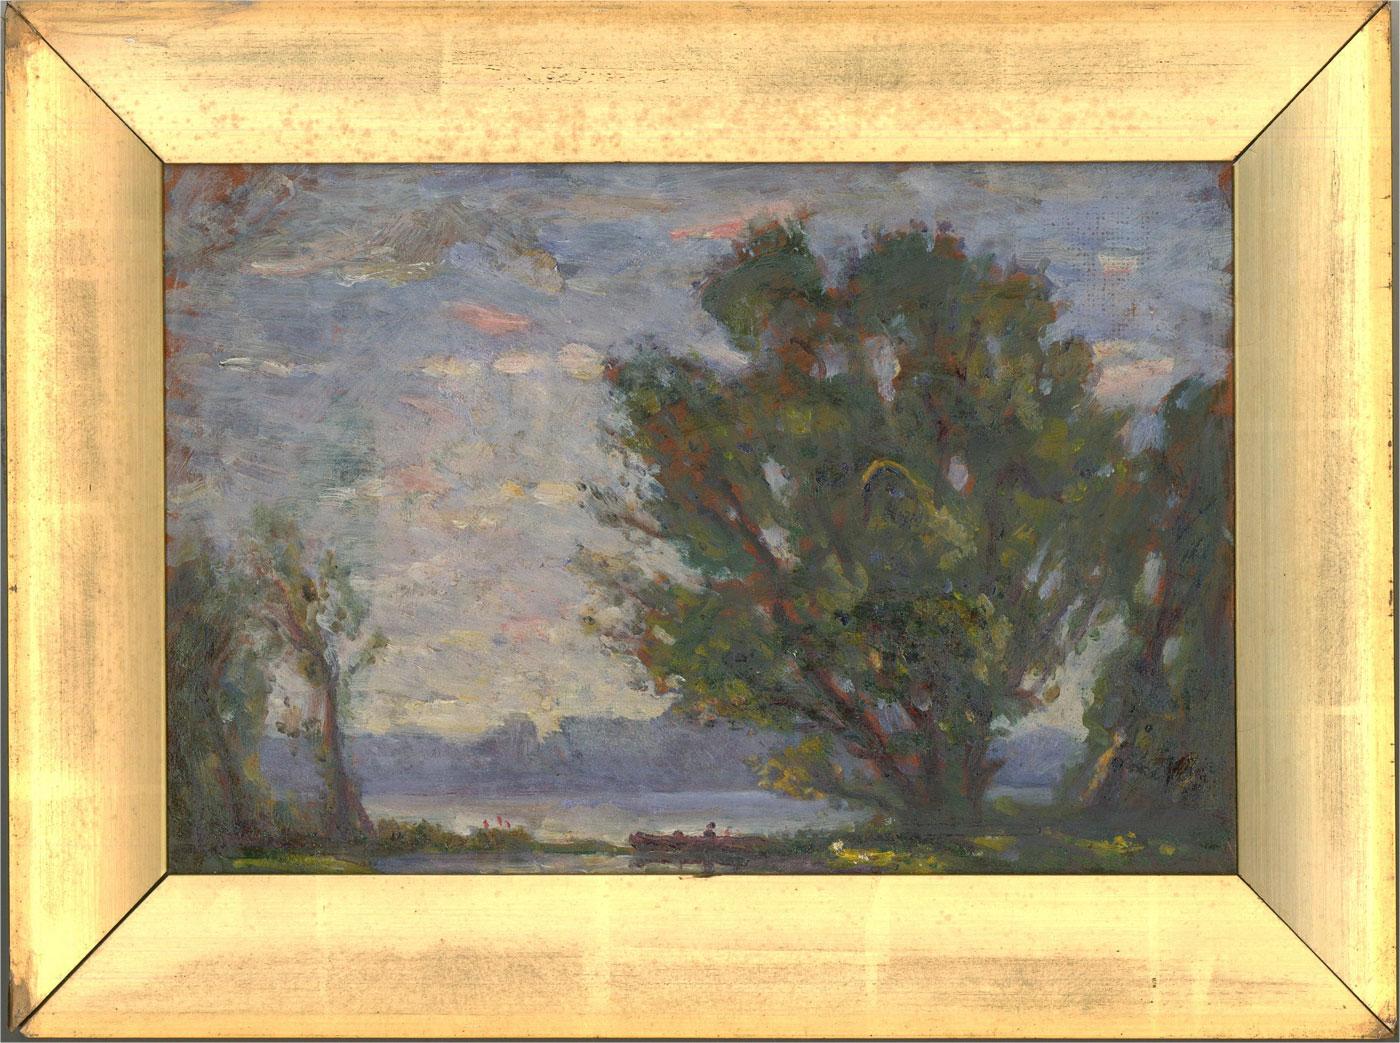 A charming mid-century oil depicting a view from a lakeside, a tree reaching into the blue sky at the right of the composition. Presented in a distressed gilt slip. Unsigned.